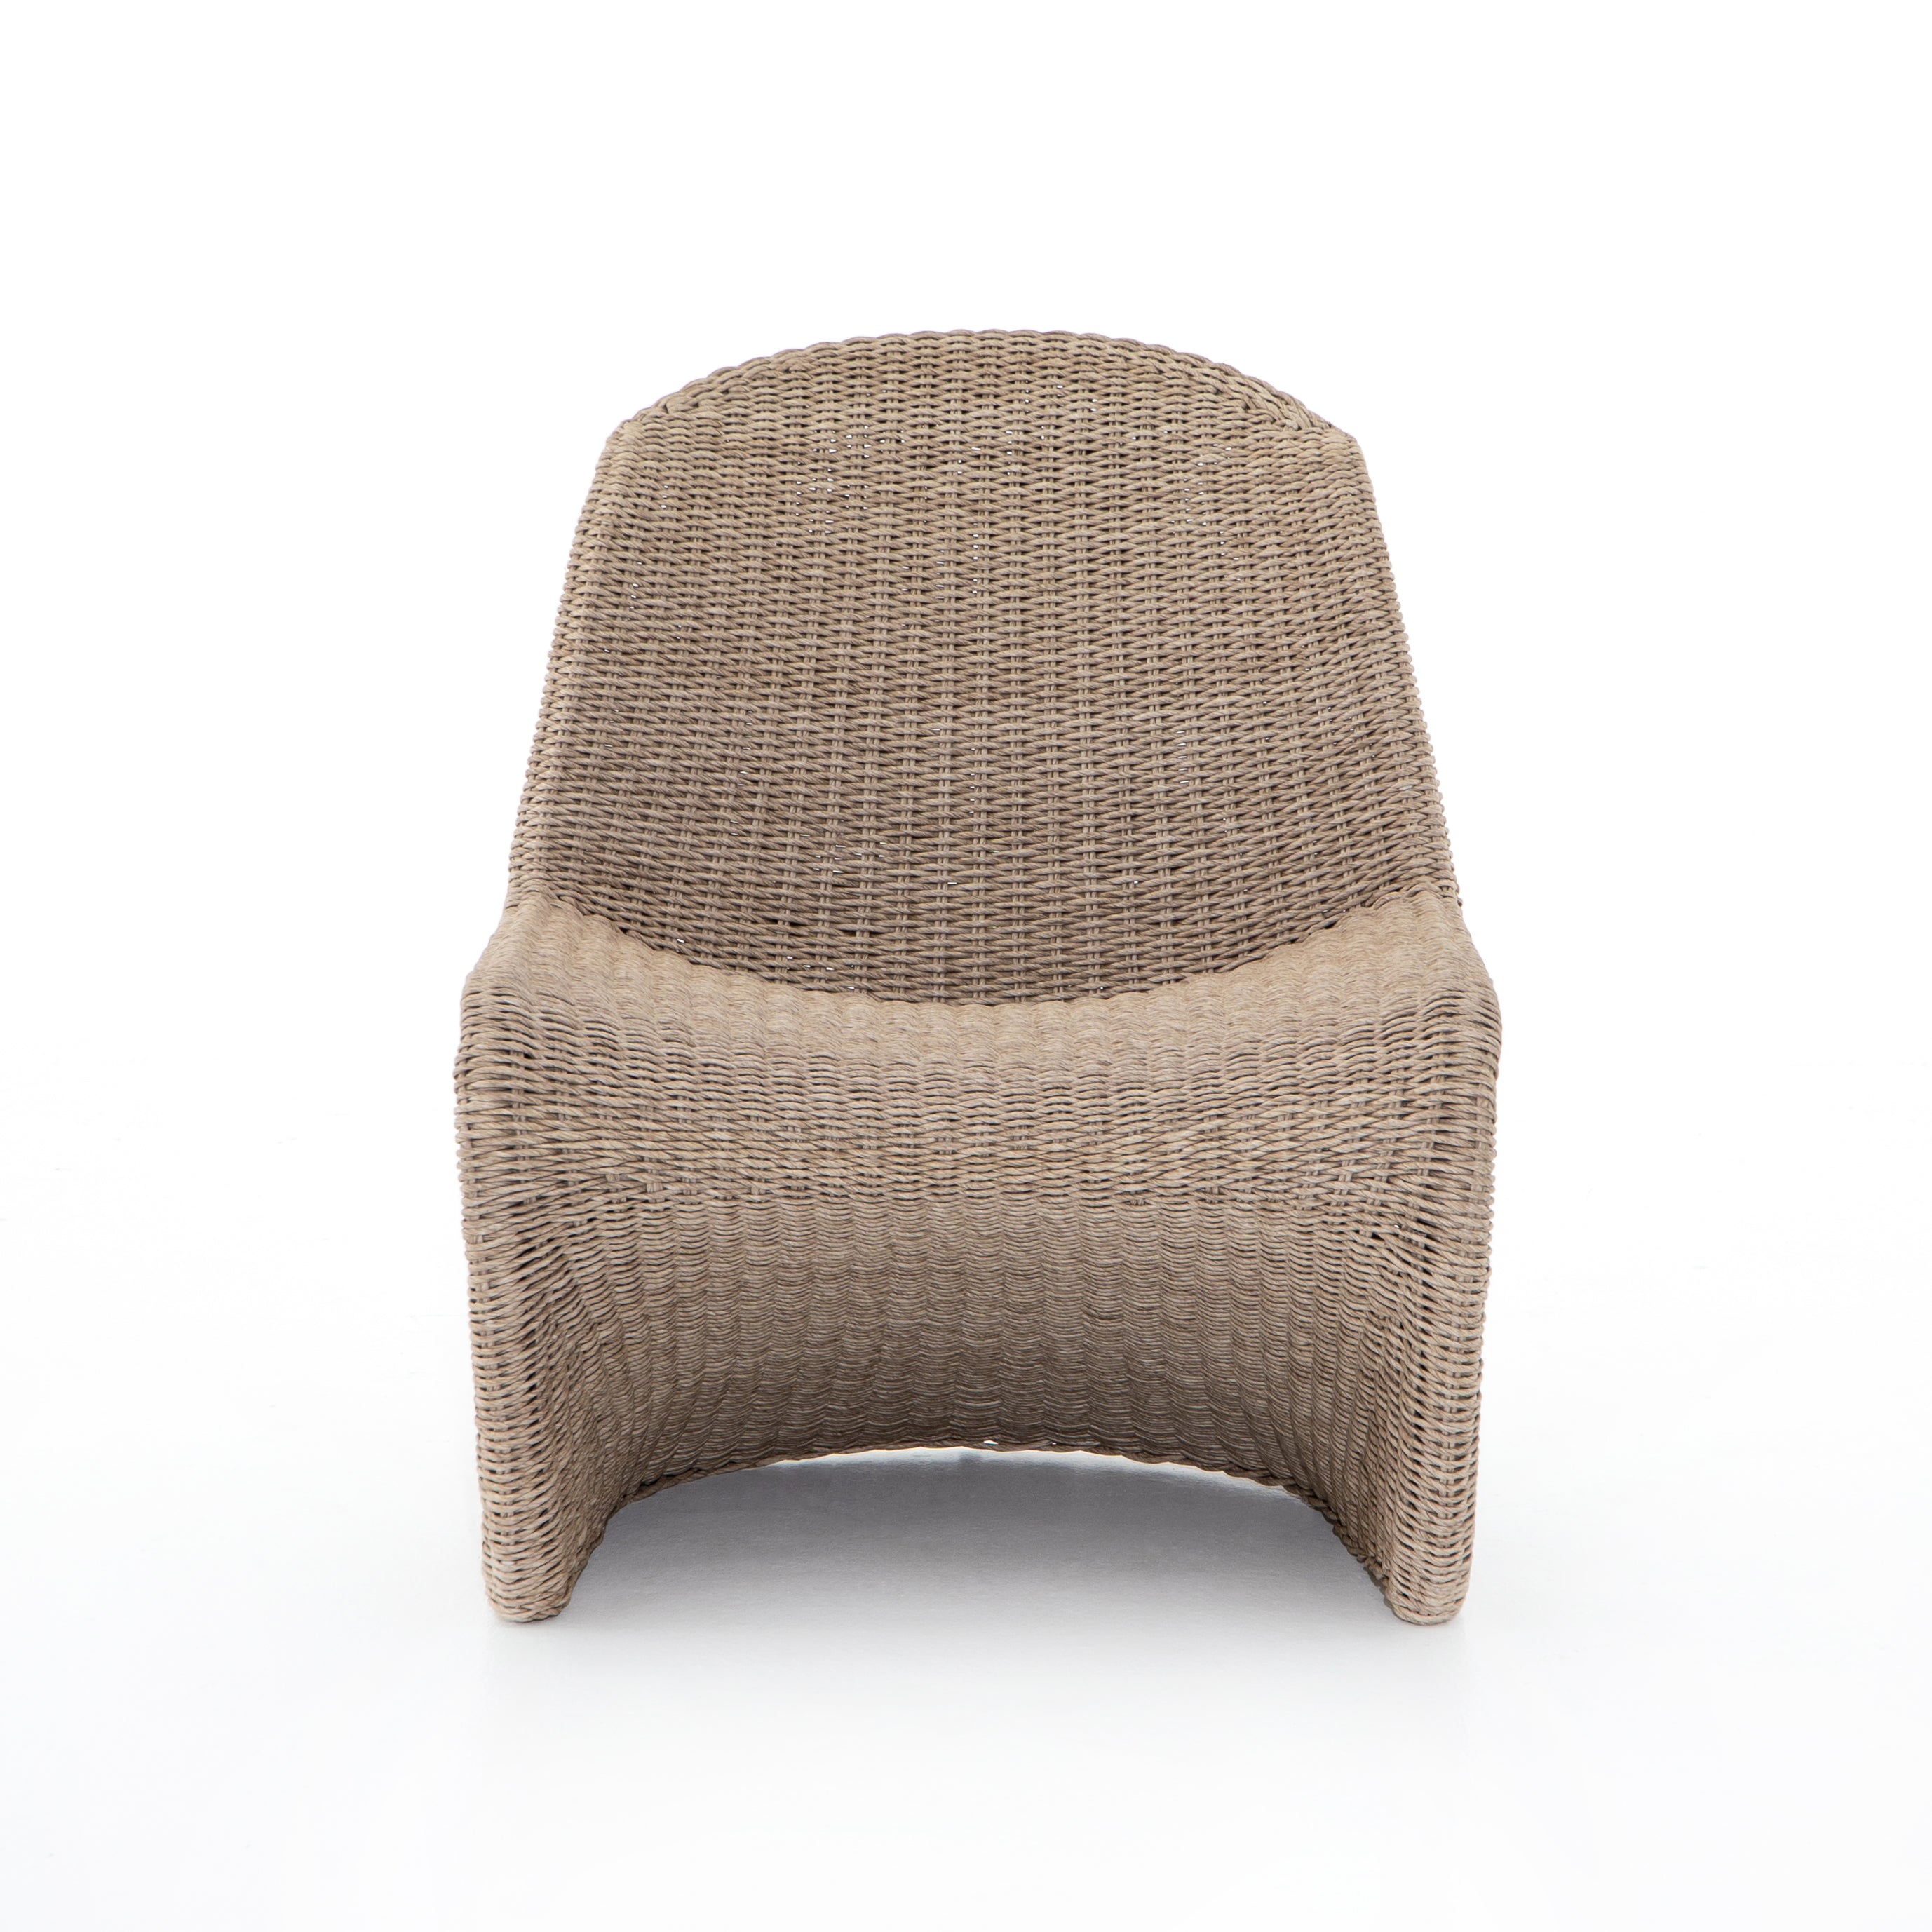 This Portia Outdoor Occasional Chair - Vintage White features a unique shape for comfortable seating. Finished in a vintage white, all-weather wicker makes this the perfect chair for indoors or out.  Cover or store inside during inclement weather and when not in use.  Overall Dimensions: 28.00